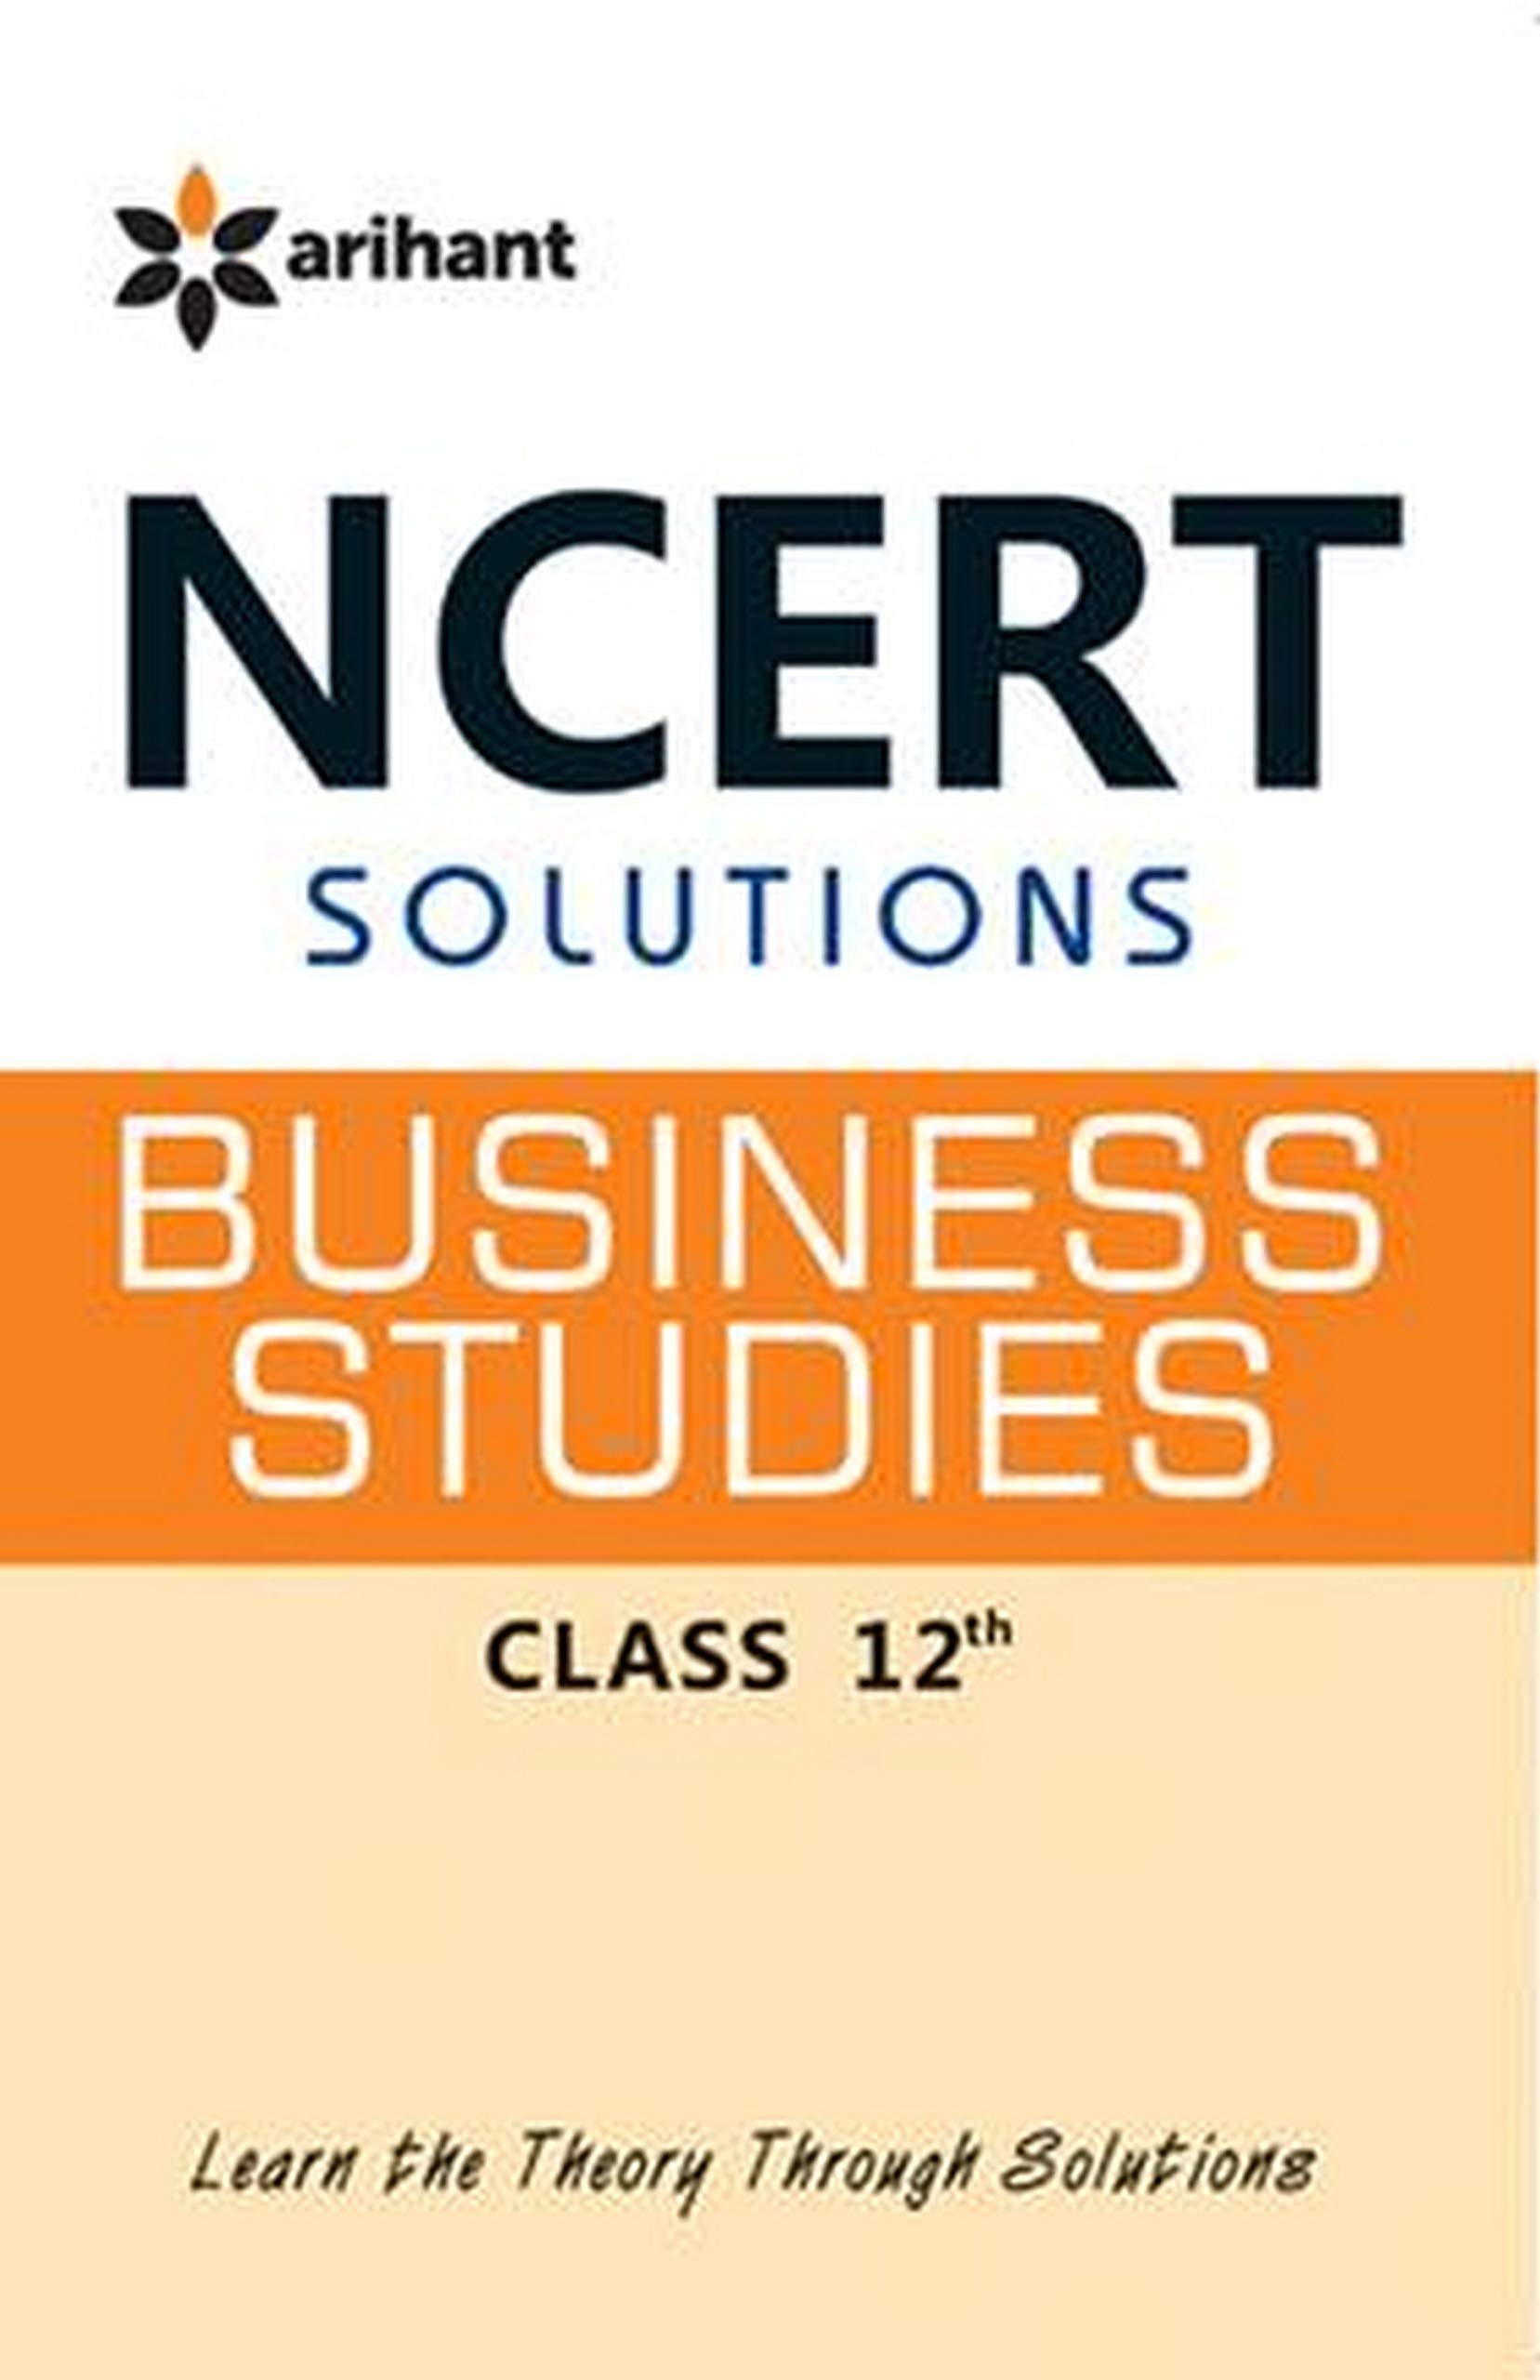 NCERT Solutions - Business Studies for Class XII